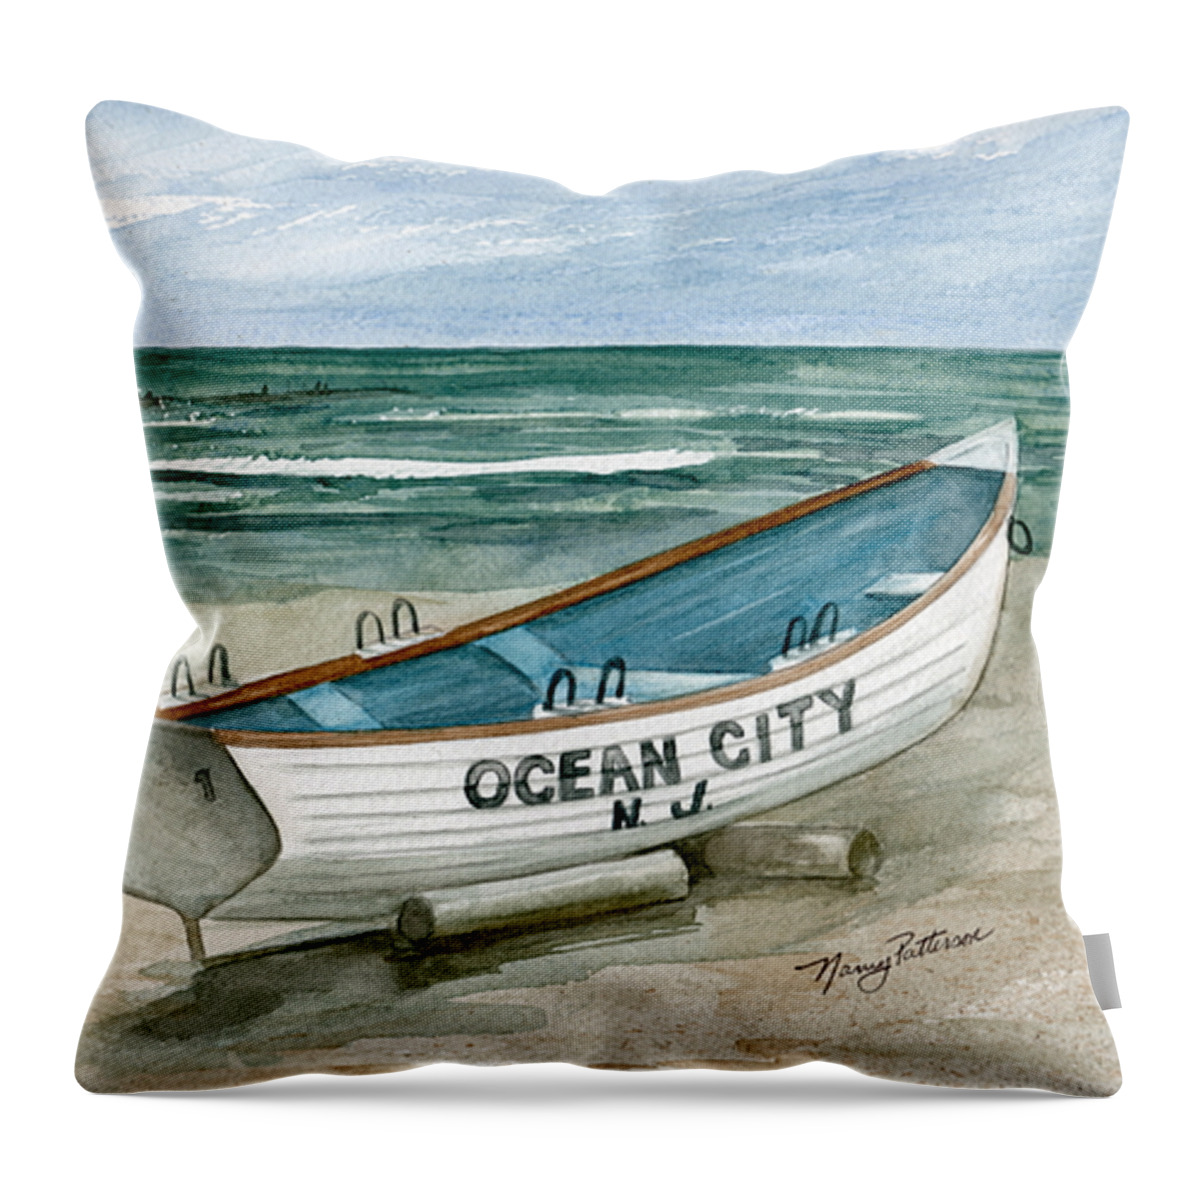 Ocean City Throw Pillow featuring the painting Ocean City Lifeguard Boat by Nancy Patterson